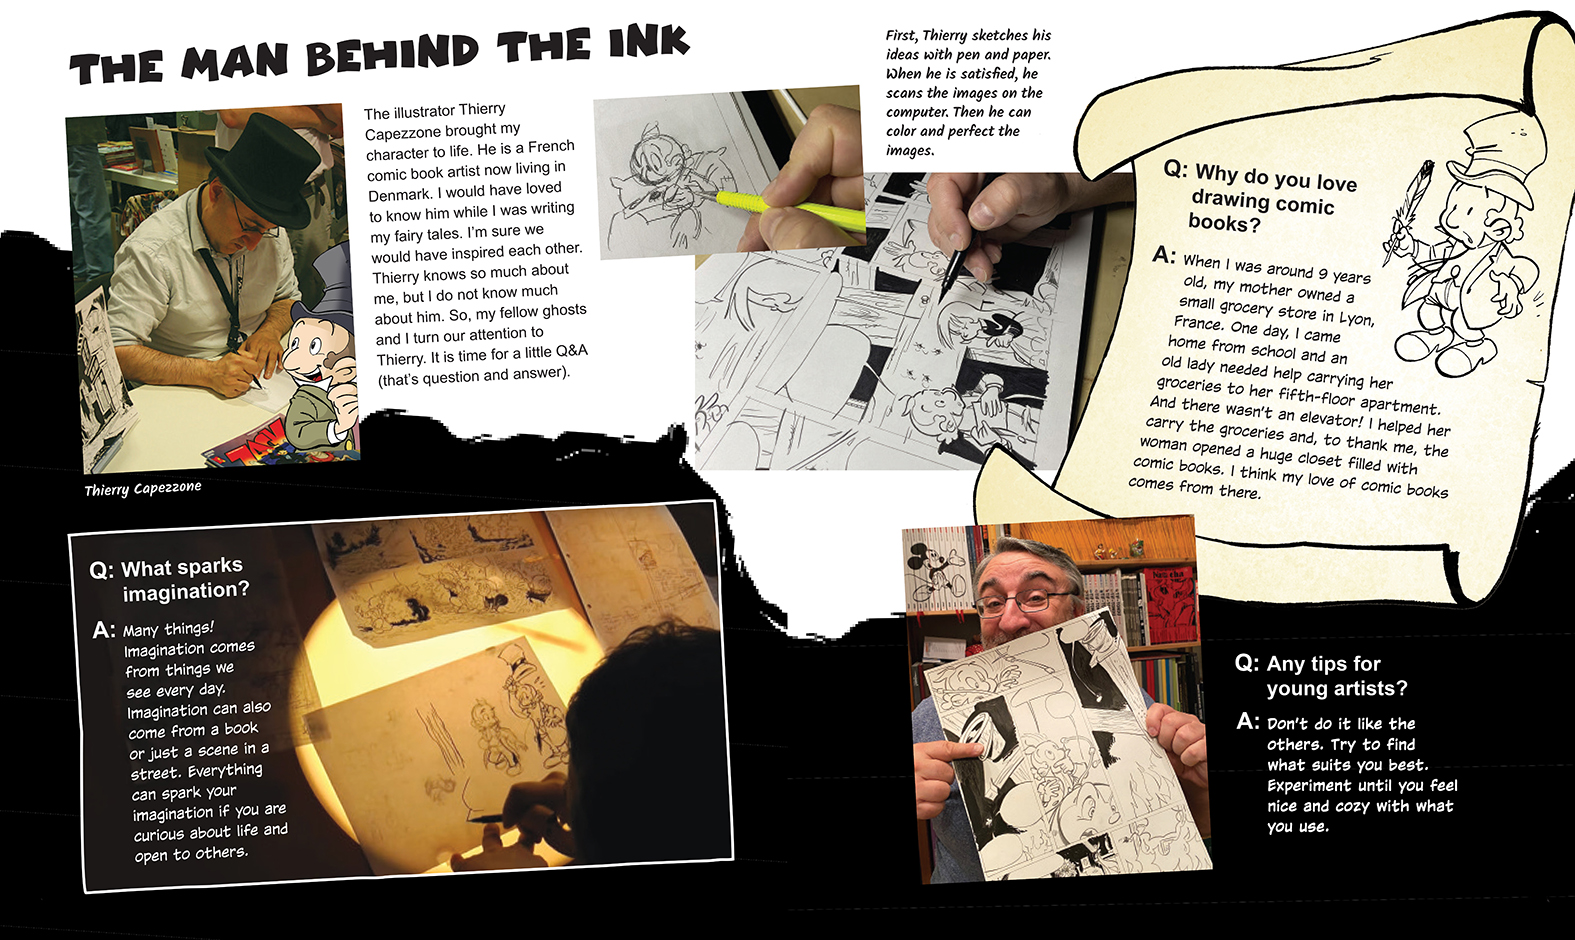 The man behind the Ink